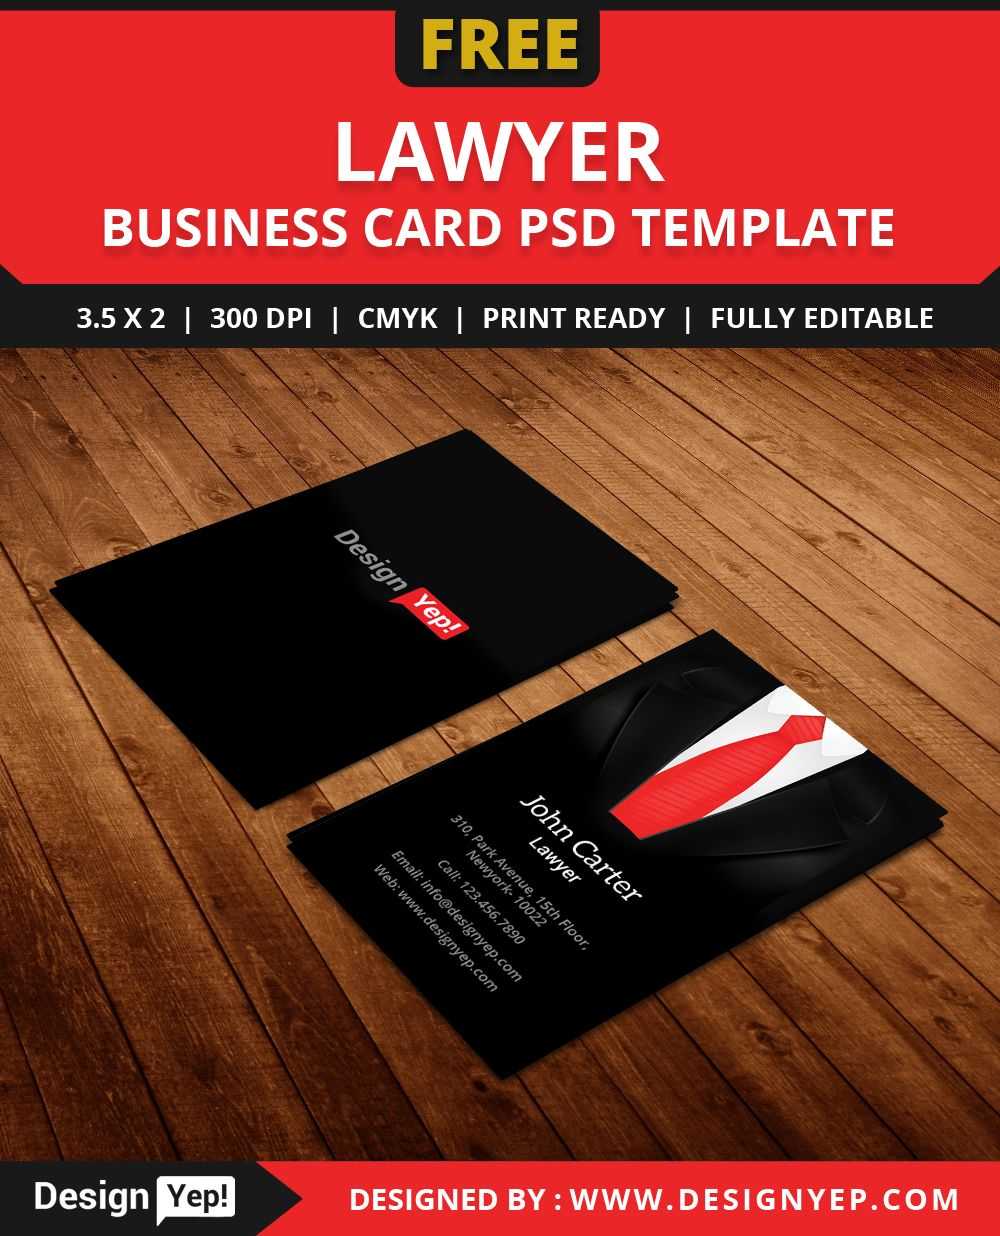 Free Lawyer Business Card Template Psd | Free Business Card Within Legal Business Cards Templates Free